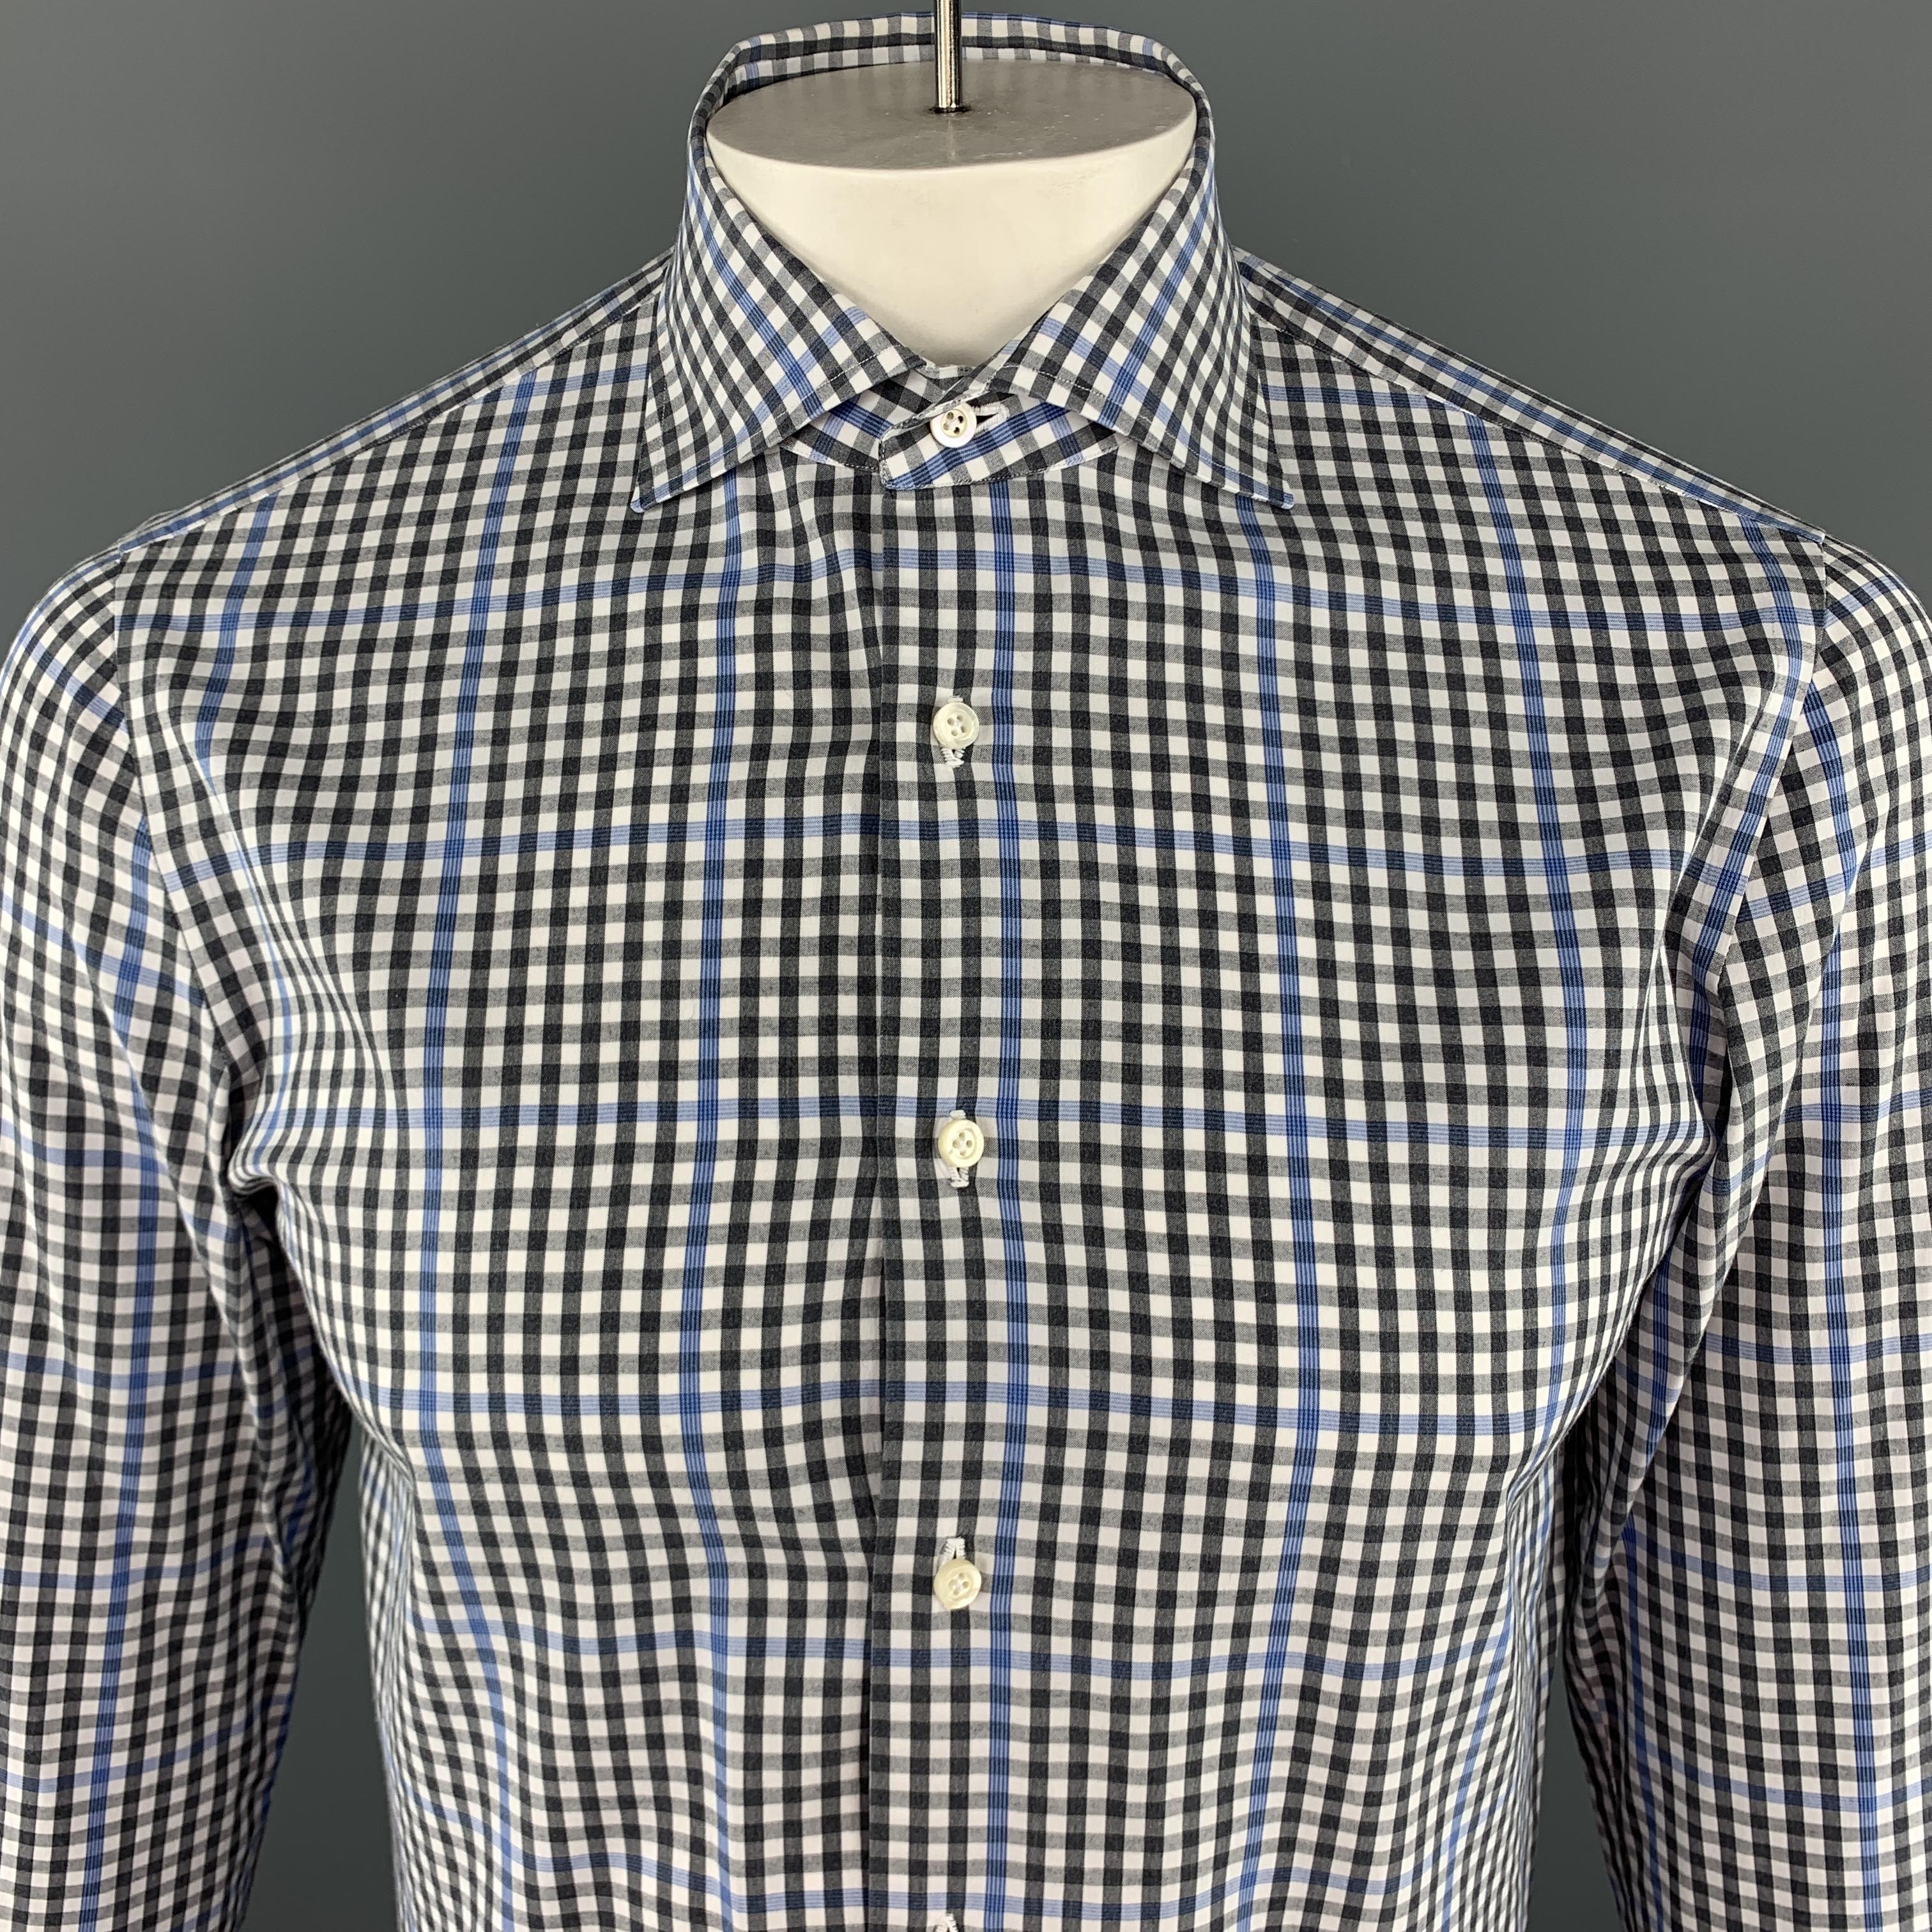 ISAIA Long Sleeve Shirt comes in  gray and blue tones in a plaid cotton material, with a spread collar, buttoned cuffs, button up. Made in Italy.

Excellent Pre-Owned Condition.
Marked: IT 39

Measurements:

Shoulder: 16 in. 
Chest: 41 in.  
Length: